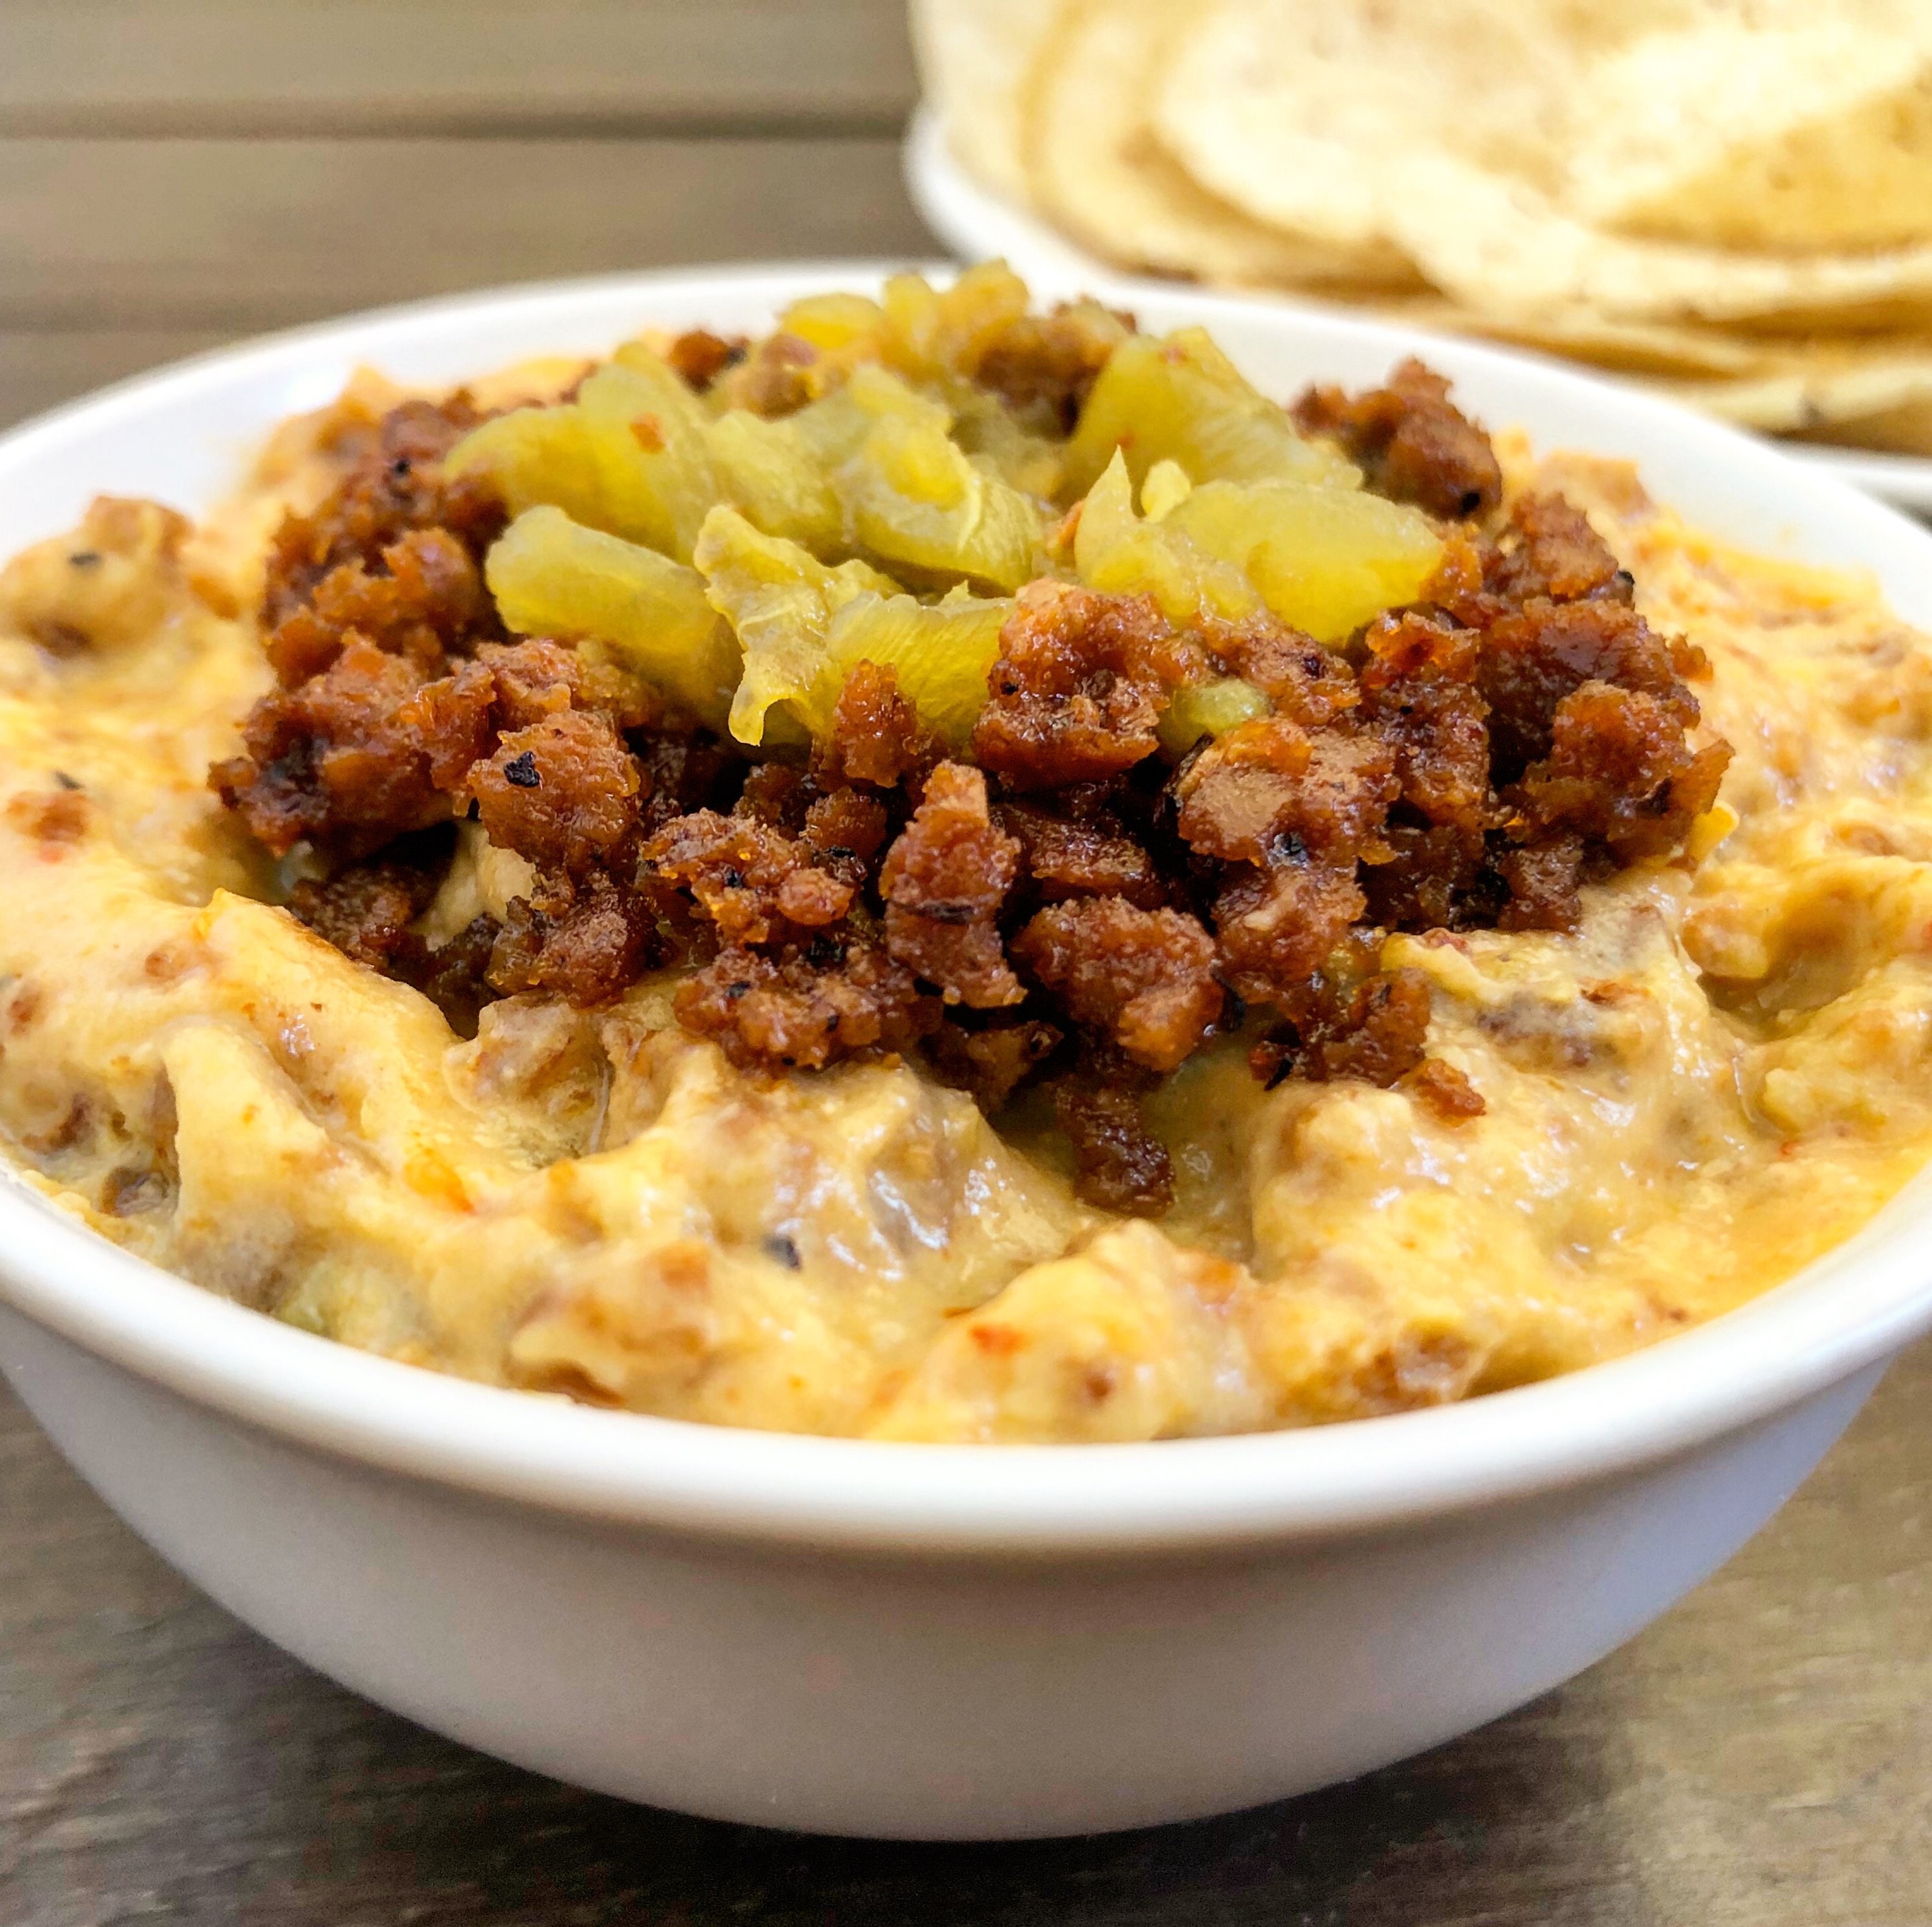 Vegan Green Chile & Chorizo Queso - Loaded with savory flavors of green chiles and chorizo, this hearty and easy to make dip is perfect for Game Day snacking! #vegancincodemayo #veganqueso #veganmexicanrecipes #vegandip #thiswifecooksrecipes via @thiswifecooks